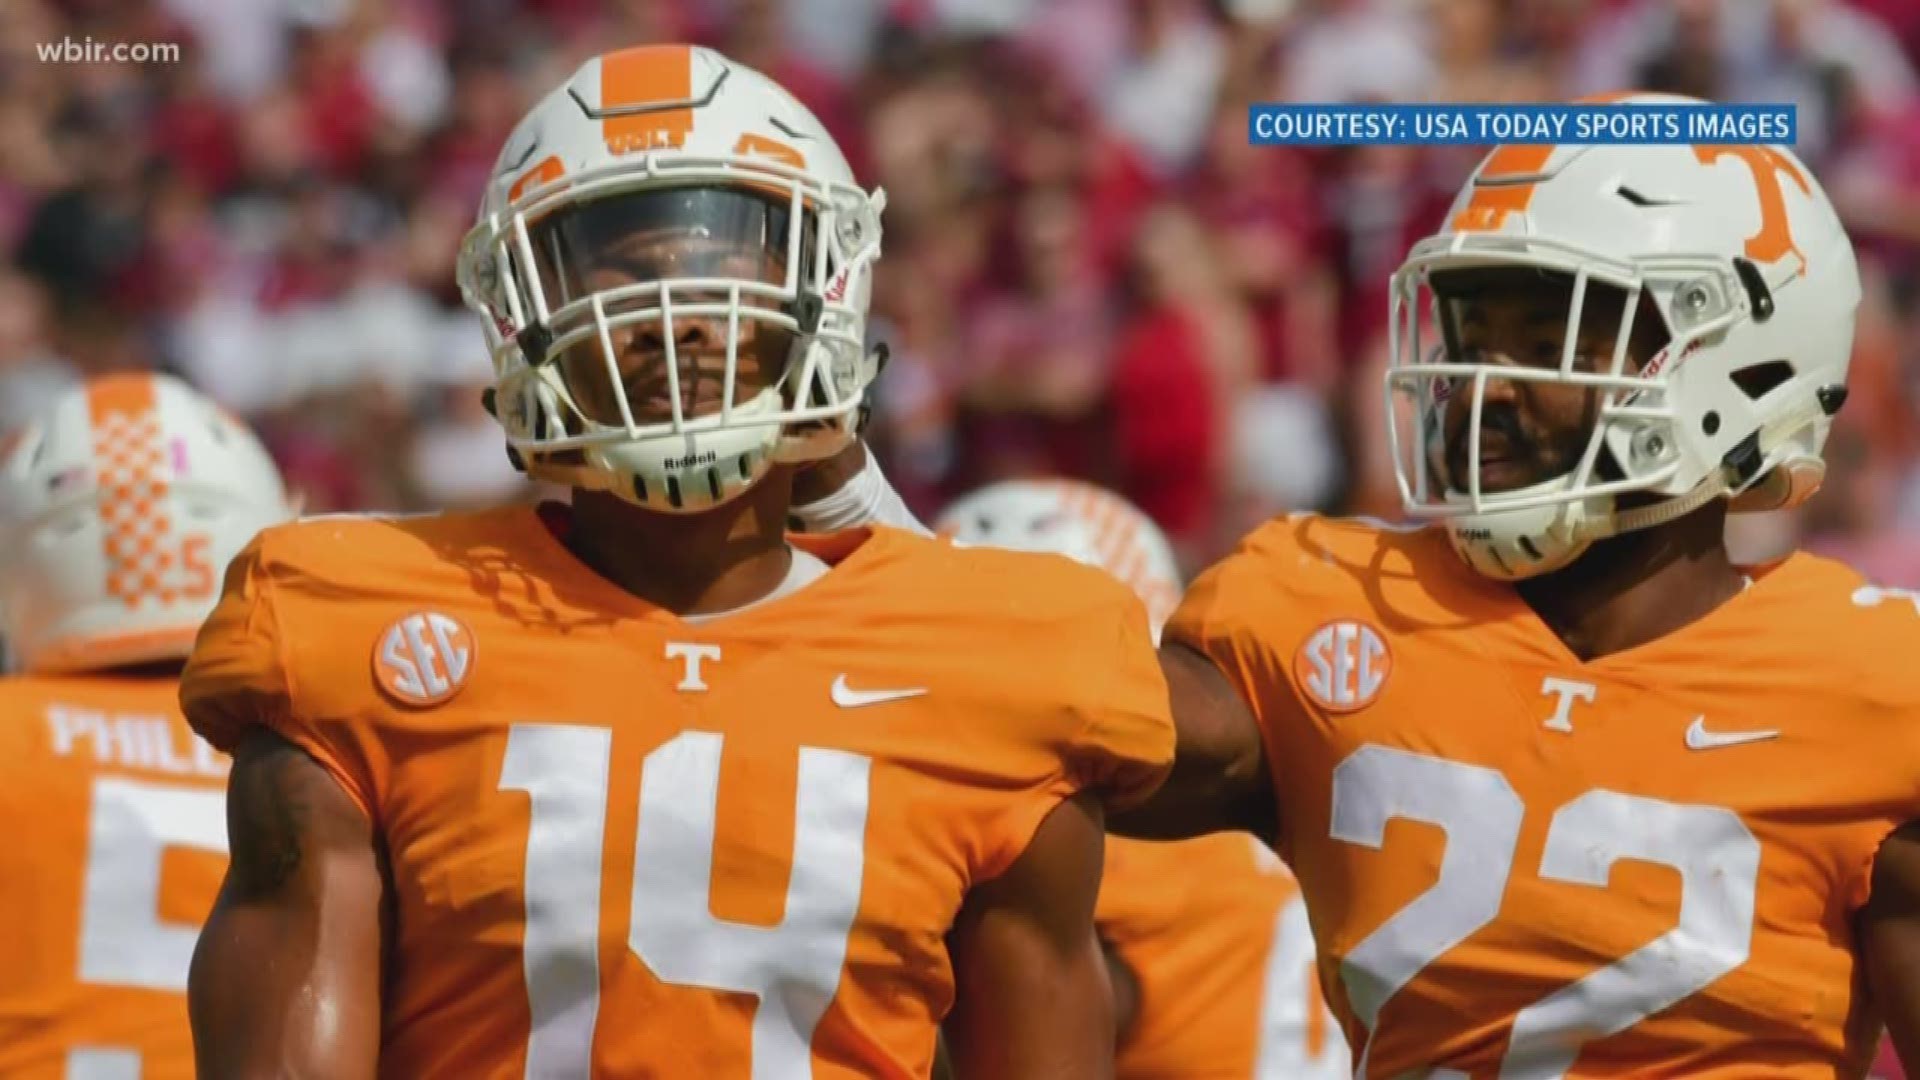 Vols redshirt linebacker Quart'e Sapp left the field during the second half of Tennessee's loss to Florida on Saturday. He and head coach Jeremy Pruitt have two different explanations for what happened.